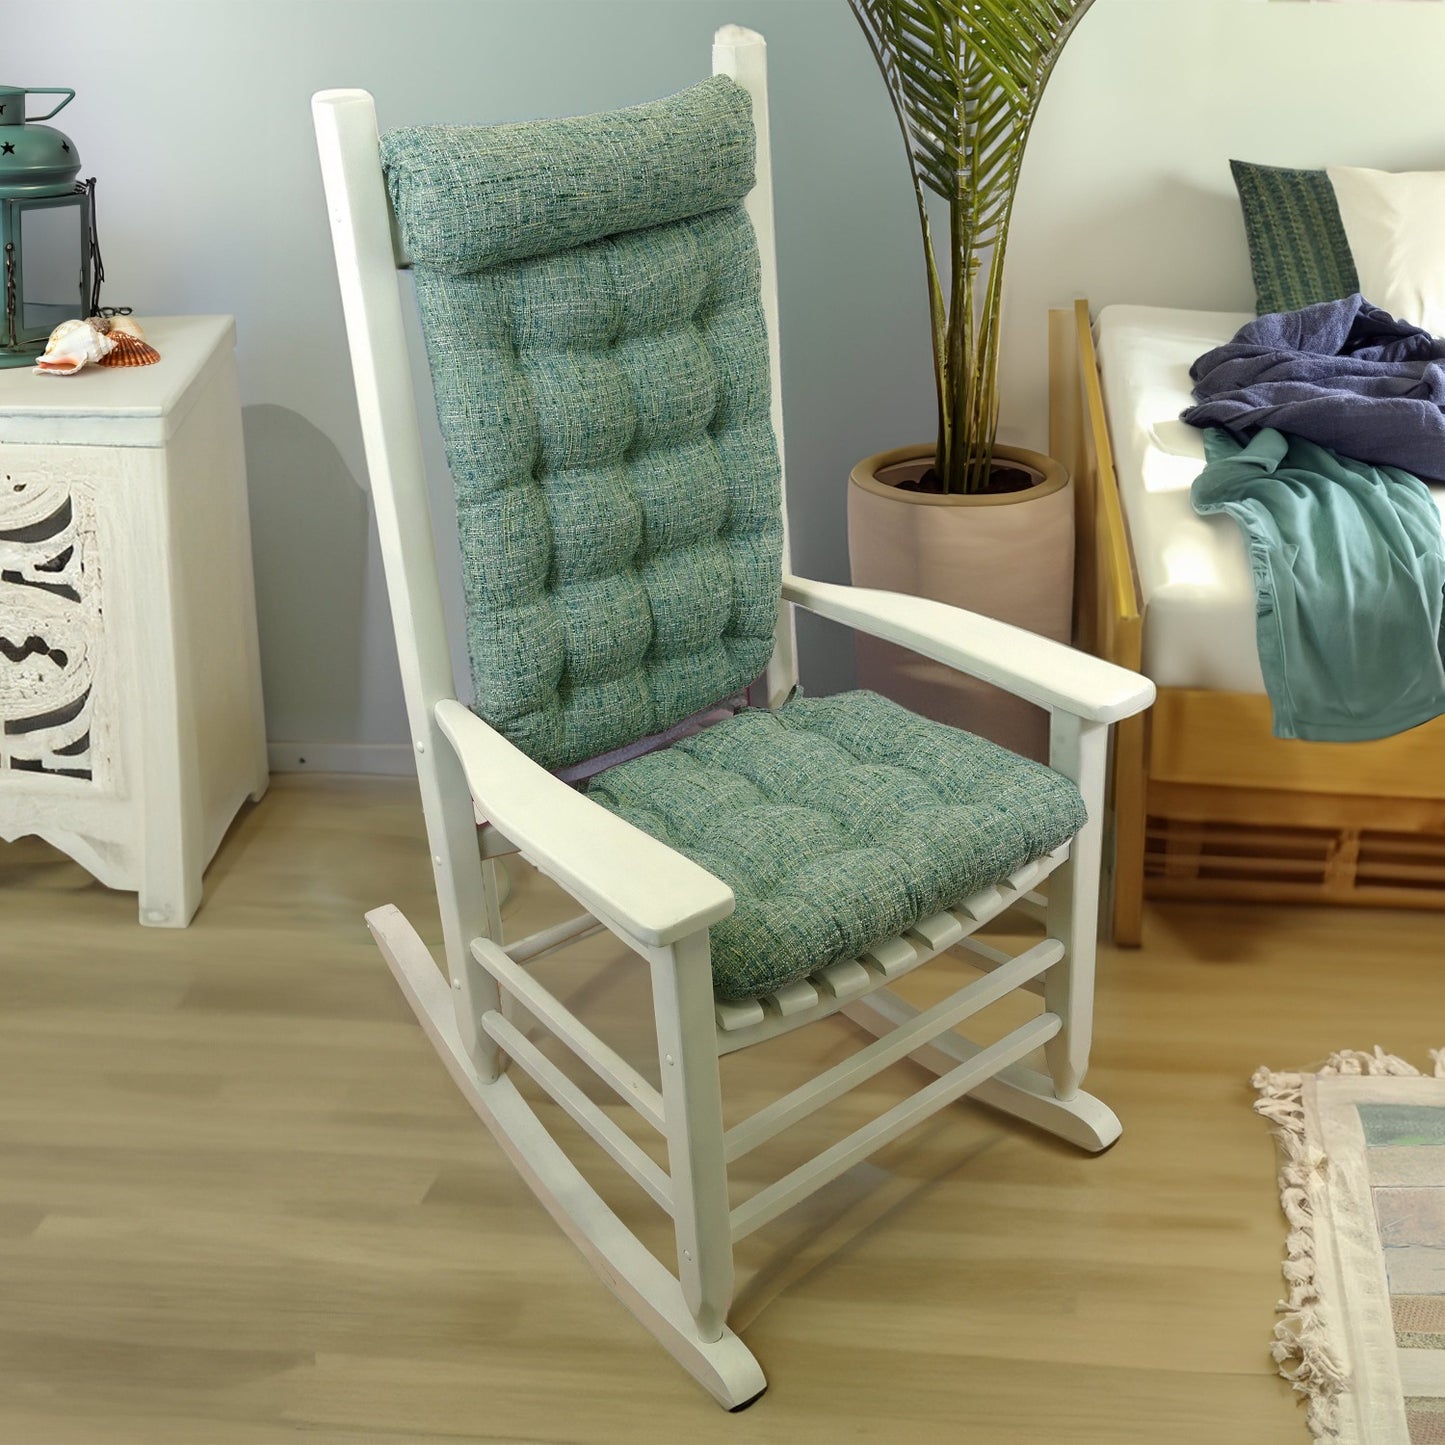 seaglass rocking chair cushions in coastal cottage with day bed and beach decor